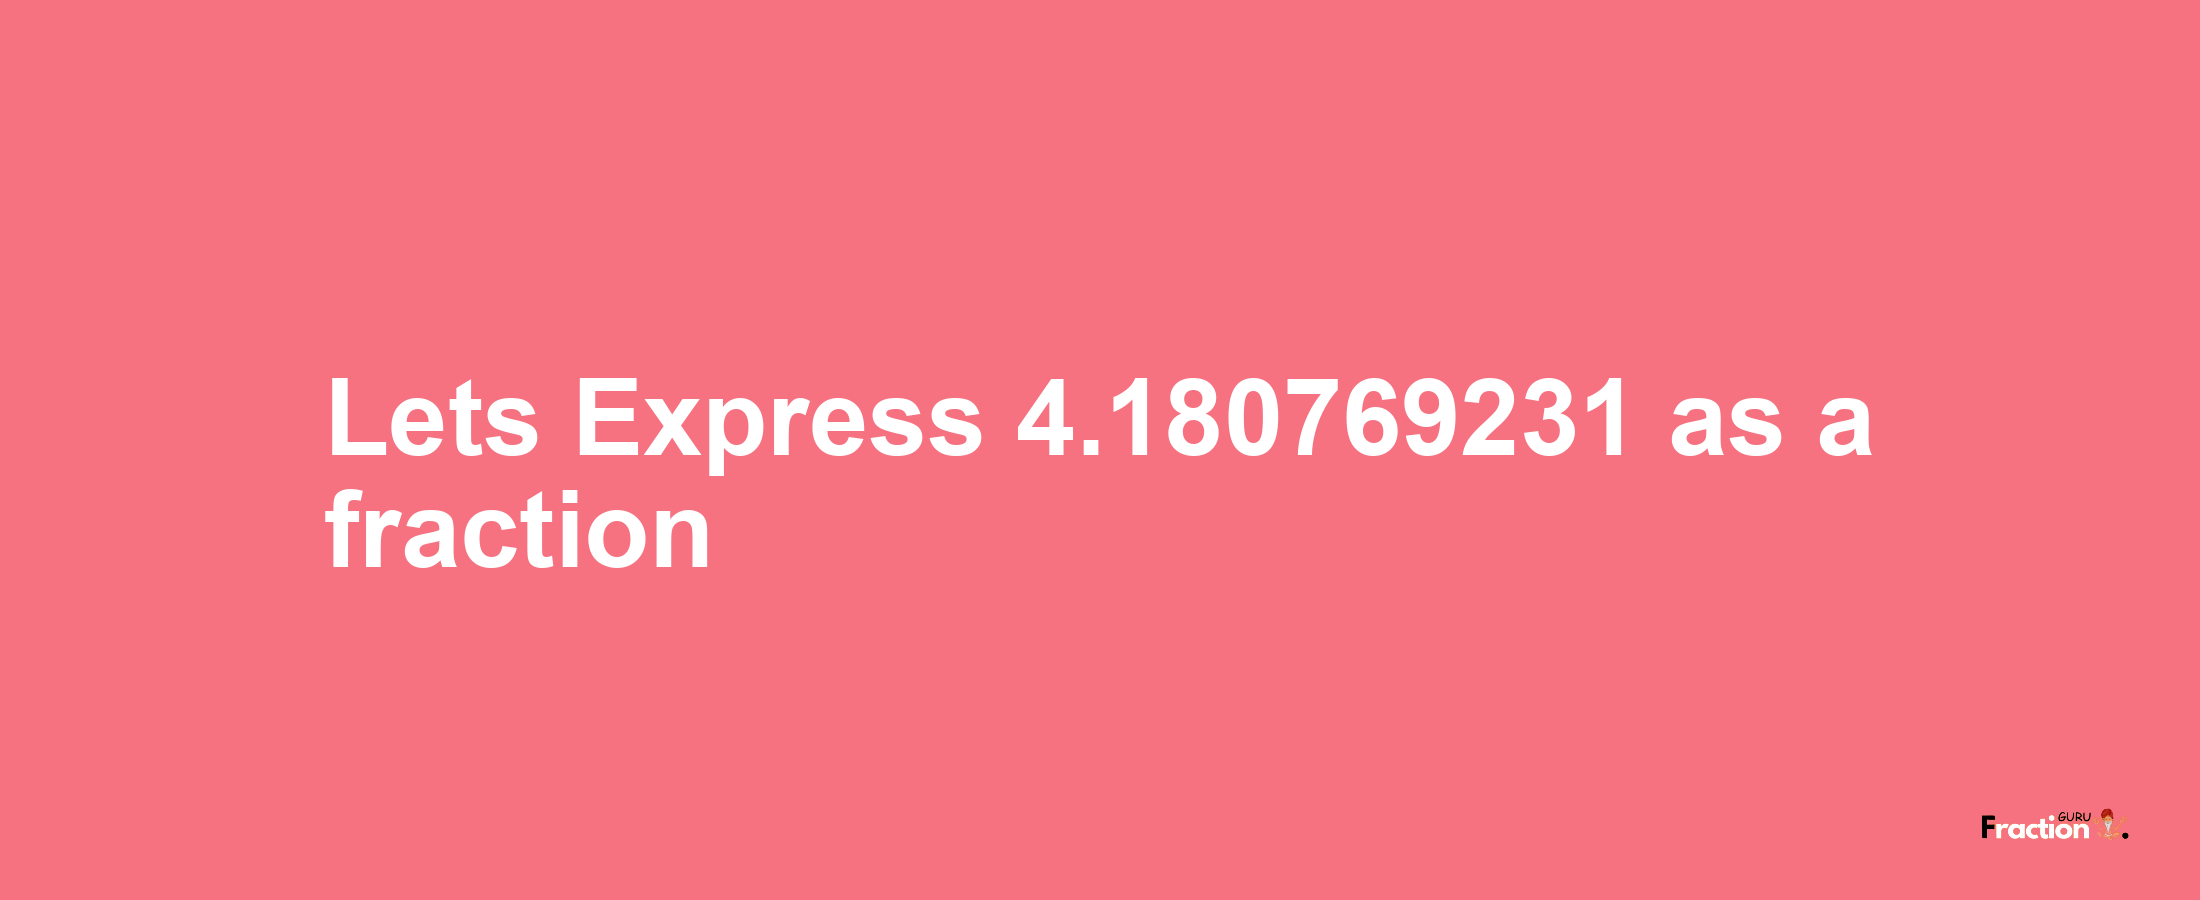 Lets Express 4.180769231 as afraction